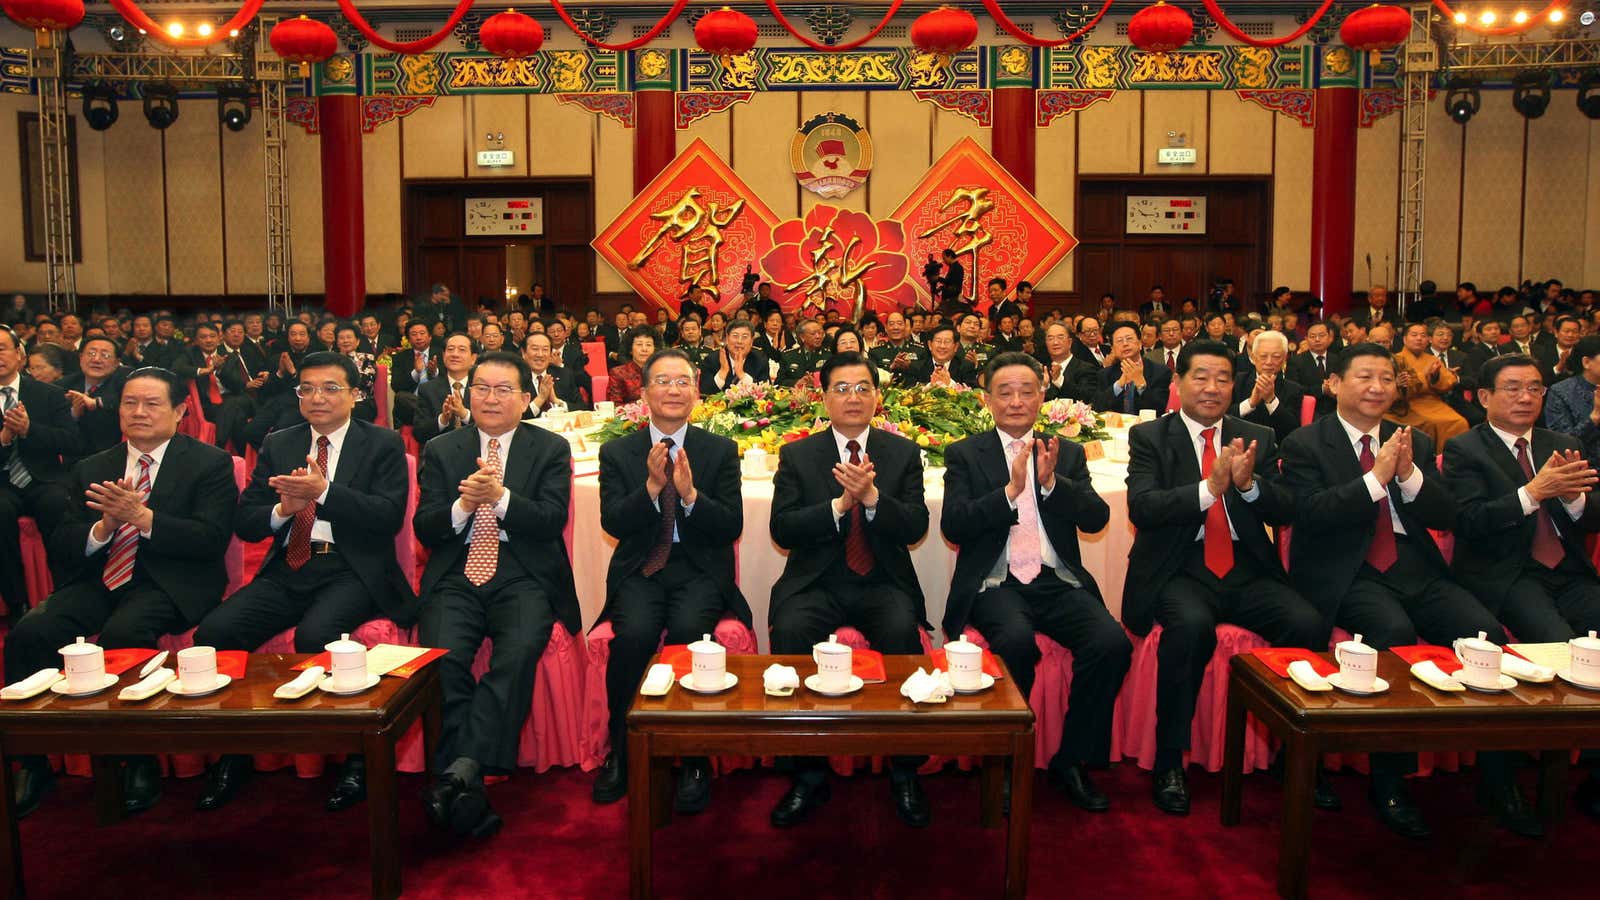 The party’s over for Zhou Yongkang (far left).